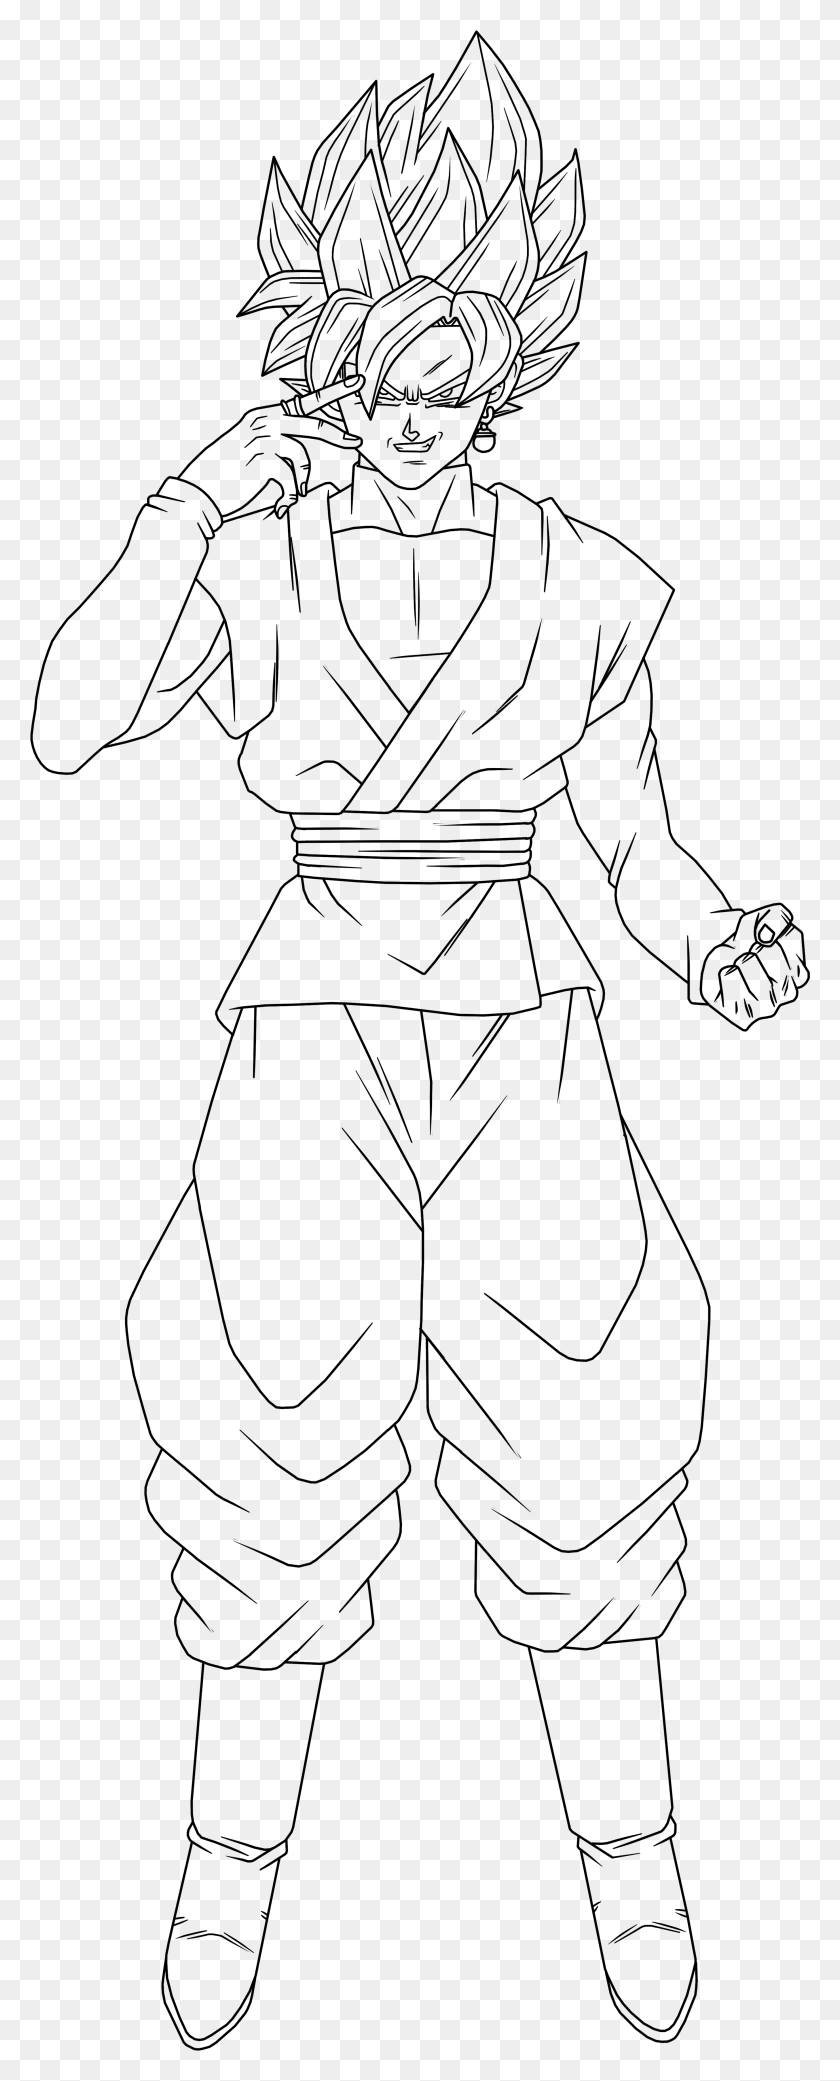 2751x7131 How To Turn Black And White Image Into Transparent Dibujos De Black Goku Para Colorear, Gray, World Of Warcraft Hd Png